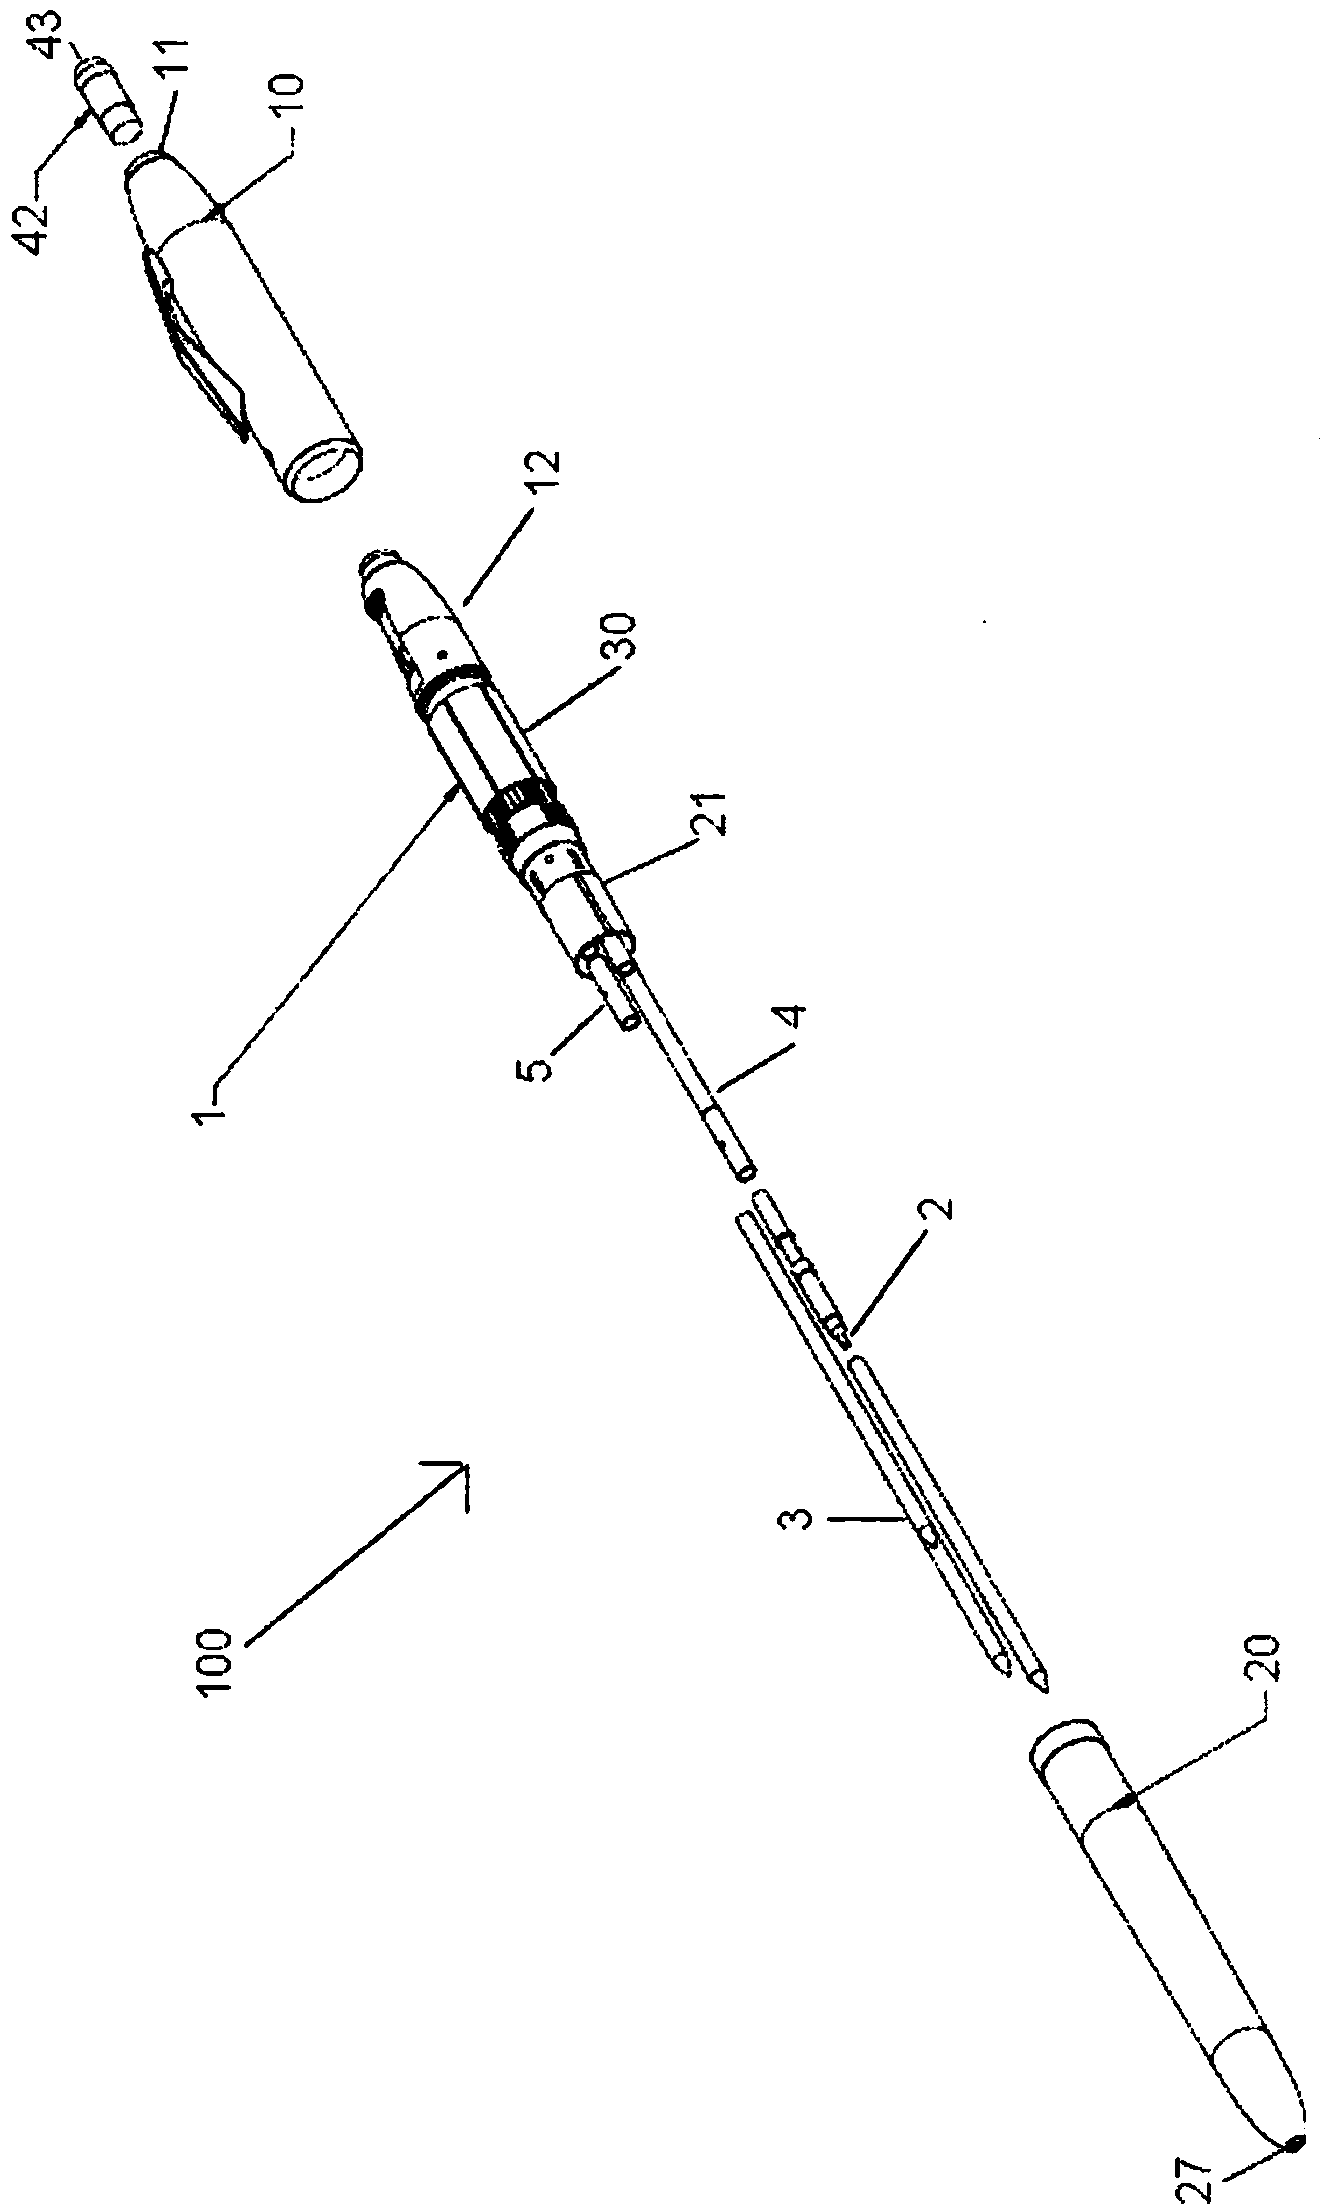 Multi-function writing instrument with propulsion mechanism